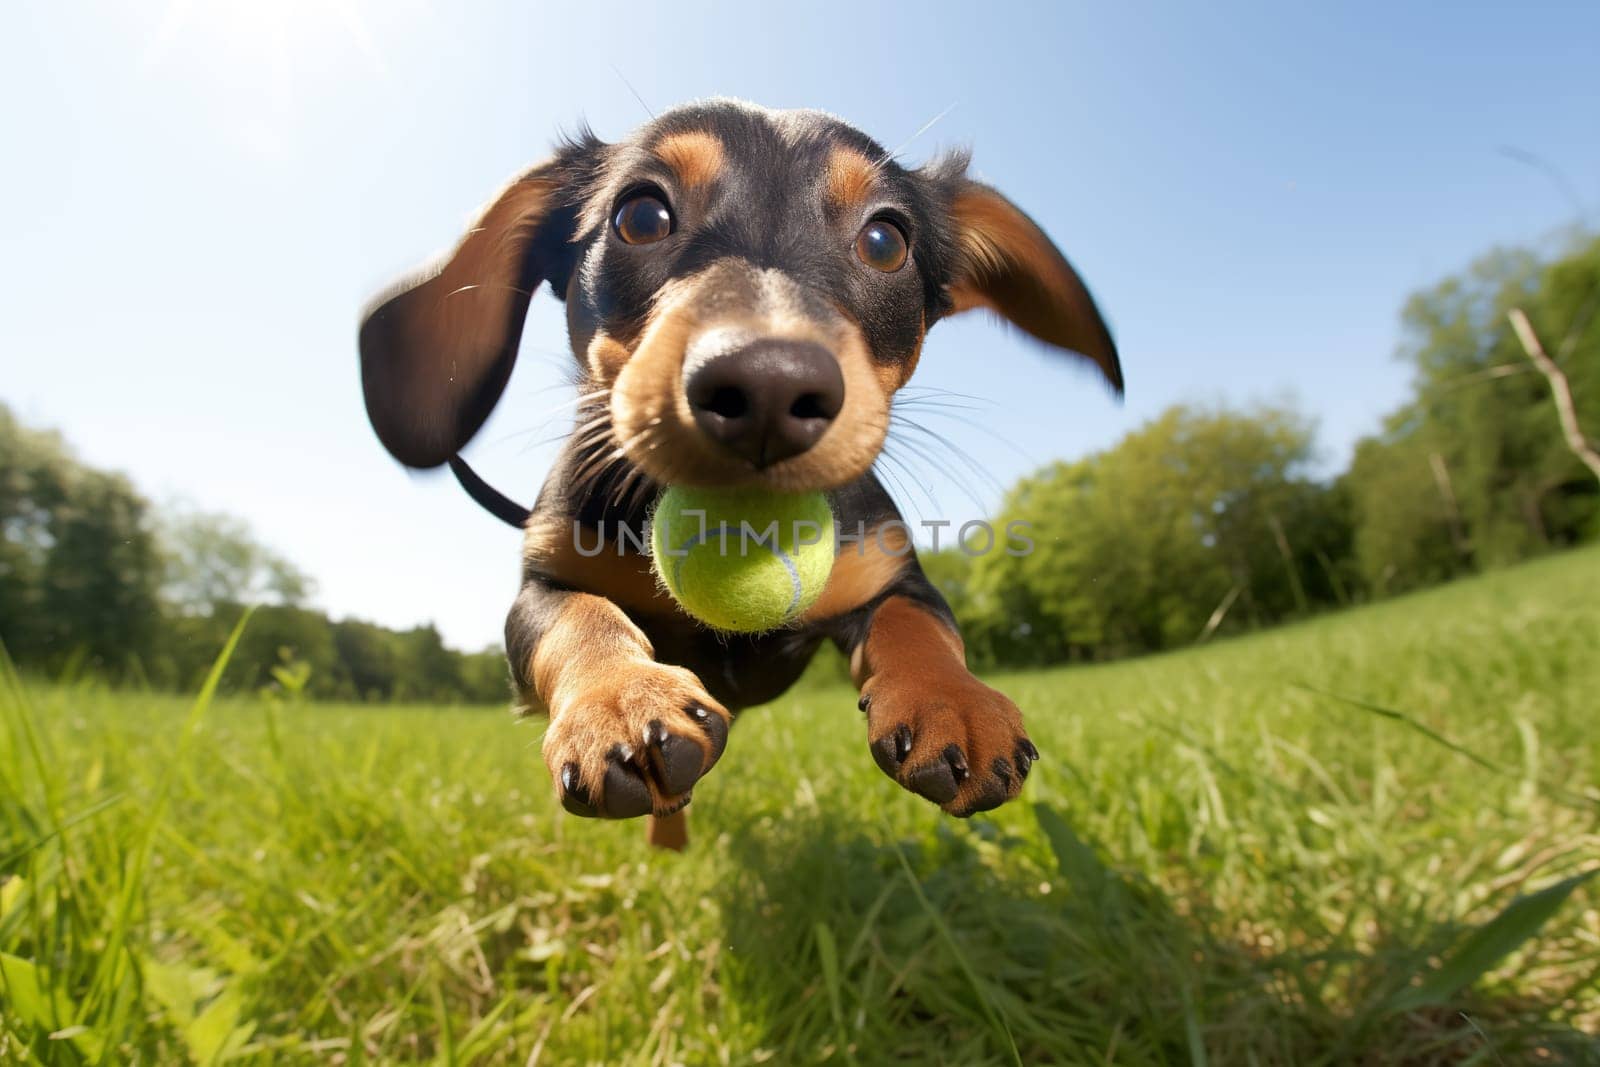 Curious Dachshund Puppy Playing the Great Outdoors by dimol